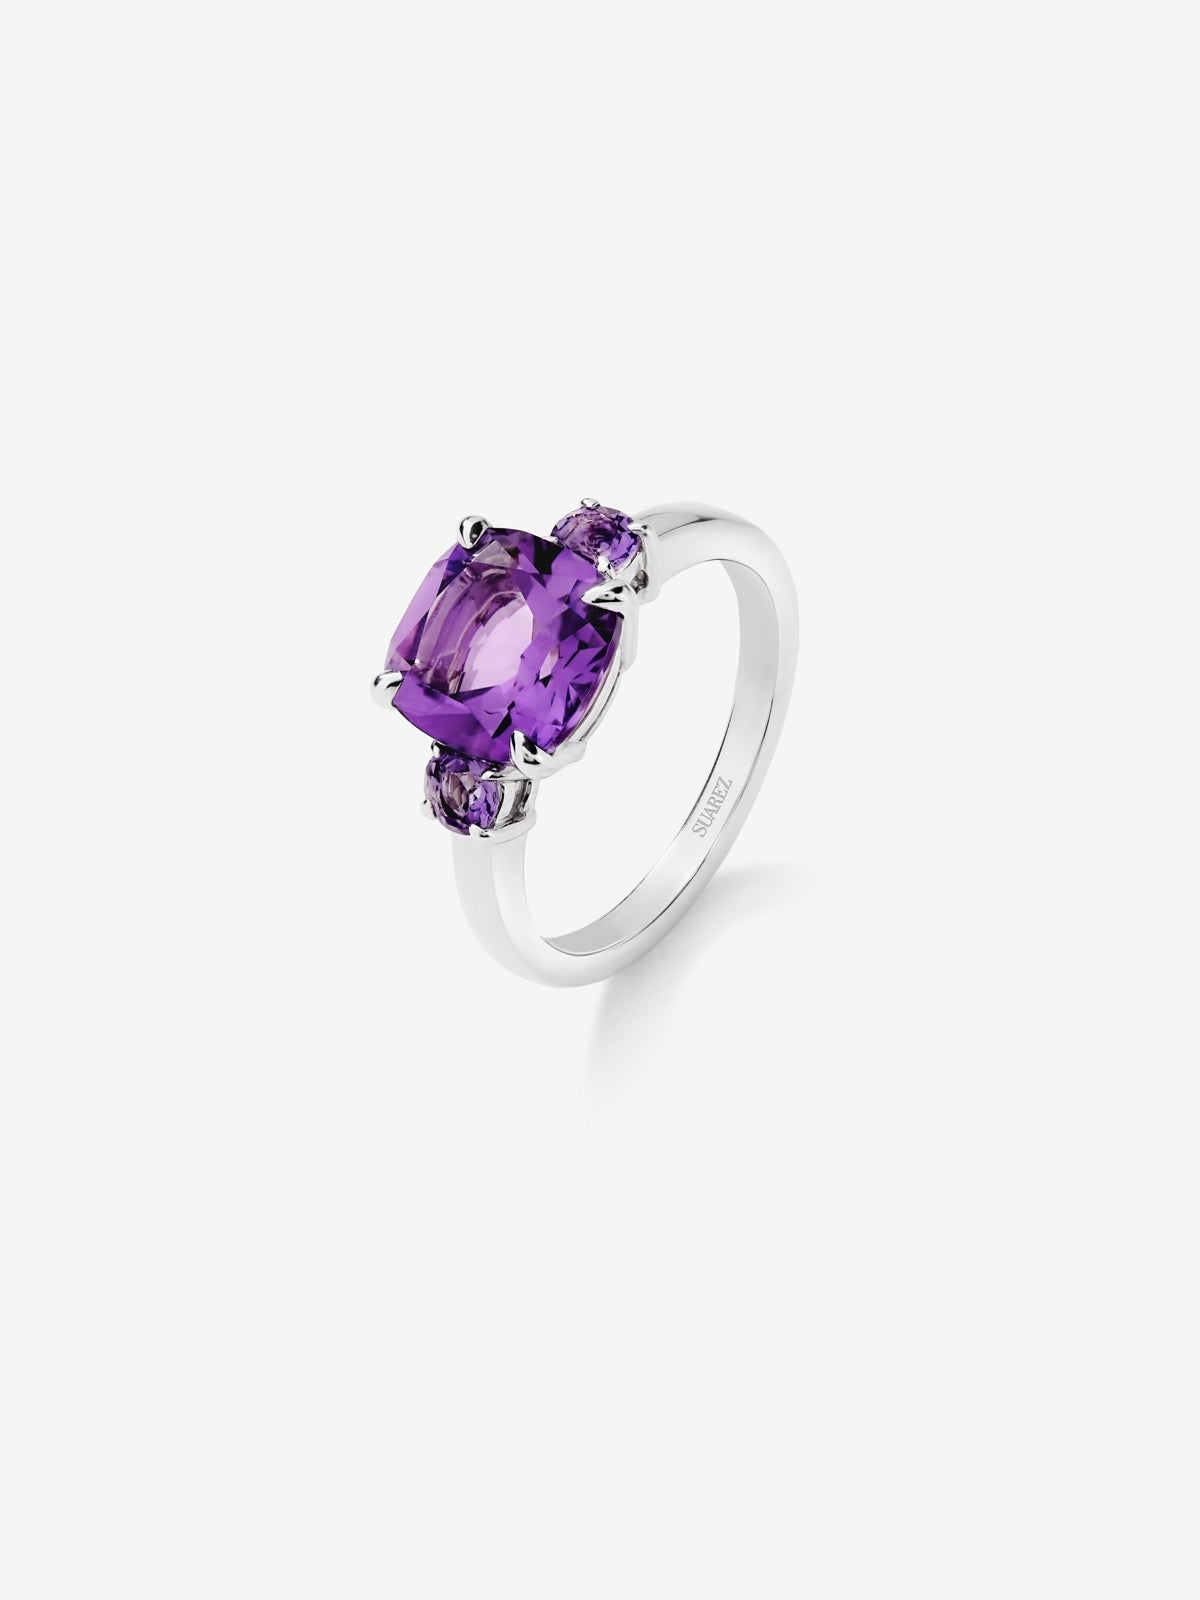 925 silver triplet ring with a cushion-cut purple amethyst 2.62 cts and 2 brilliant-cut purple amethysts with a total of 0.3 cts